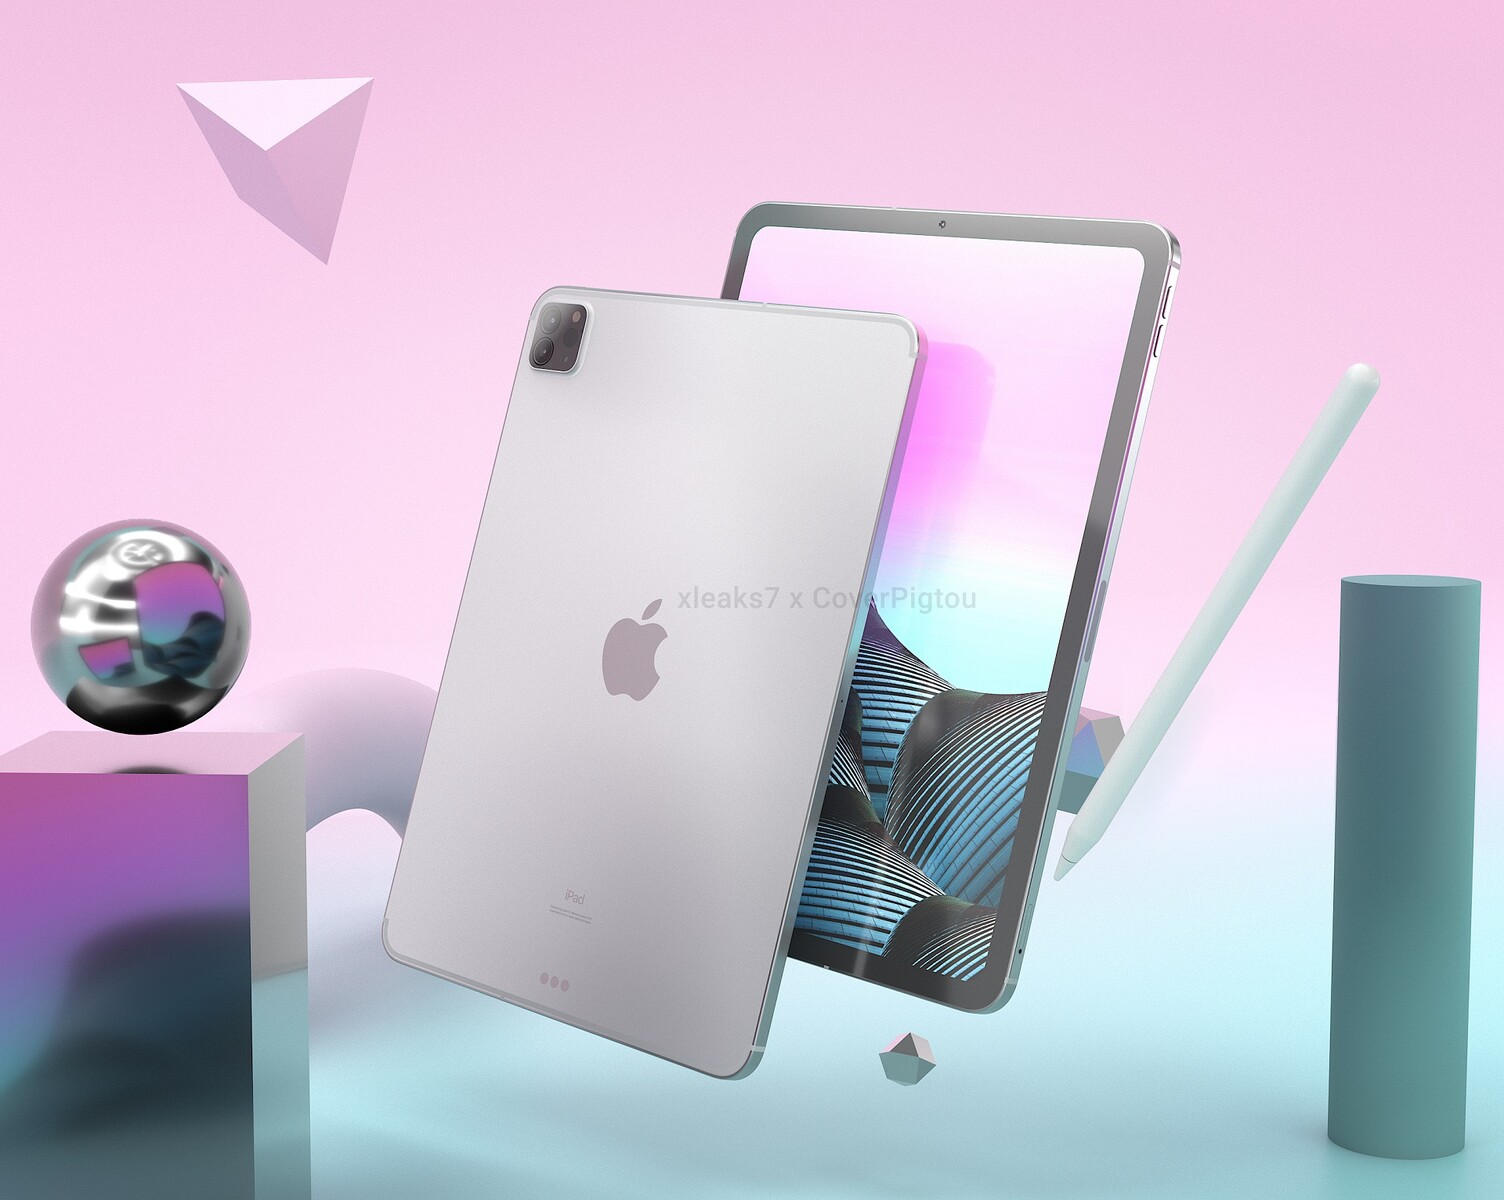 Apple iPad Pro 2021 renders showcase new 11-inch and 12.9-inch models -   News